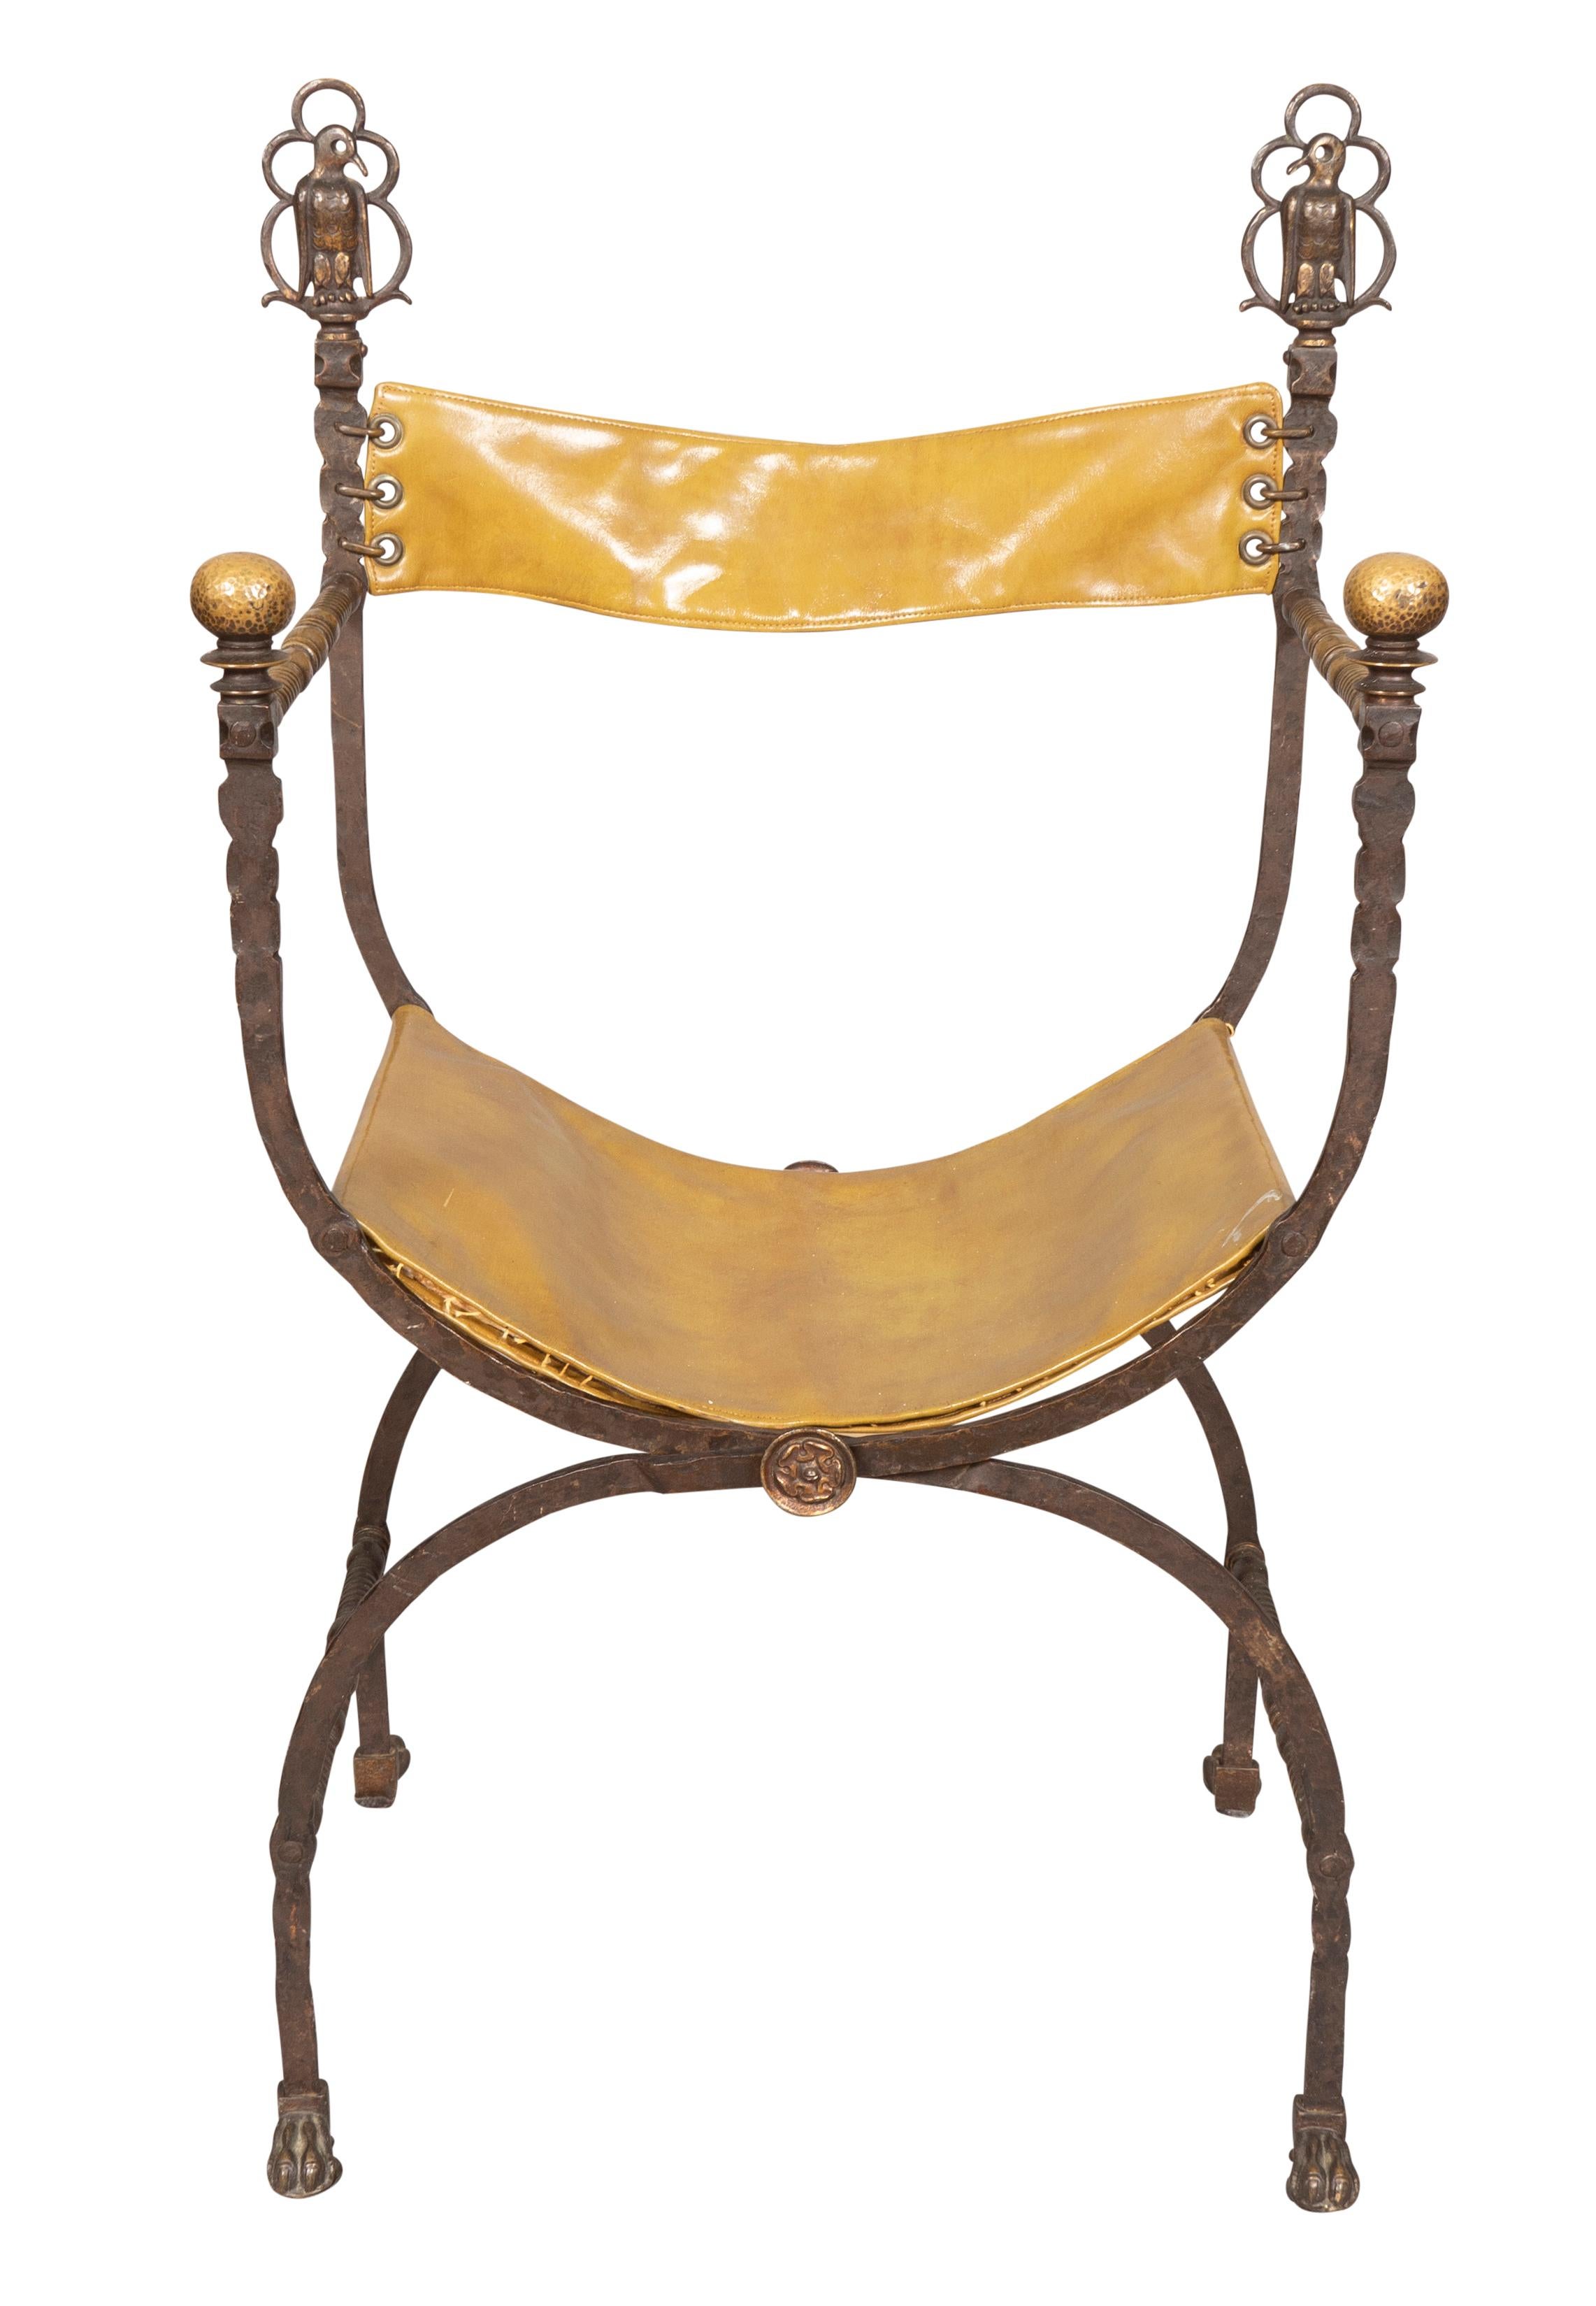 American Renaissance Revival Wrought Iron And Bronze Dante Chair For Sale